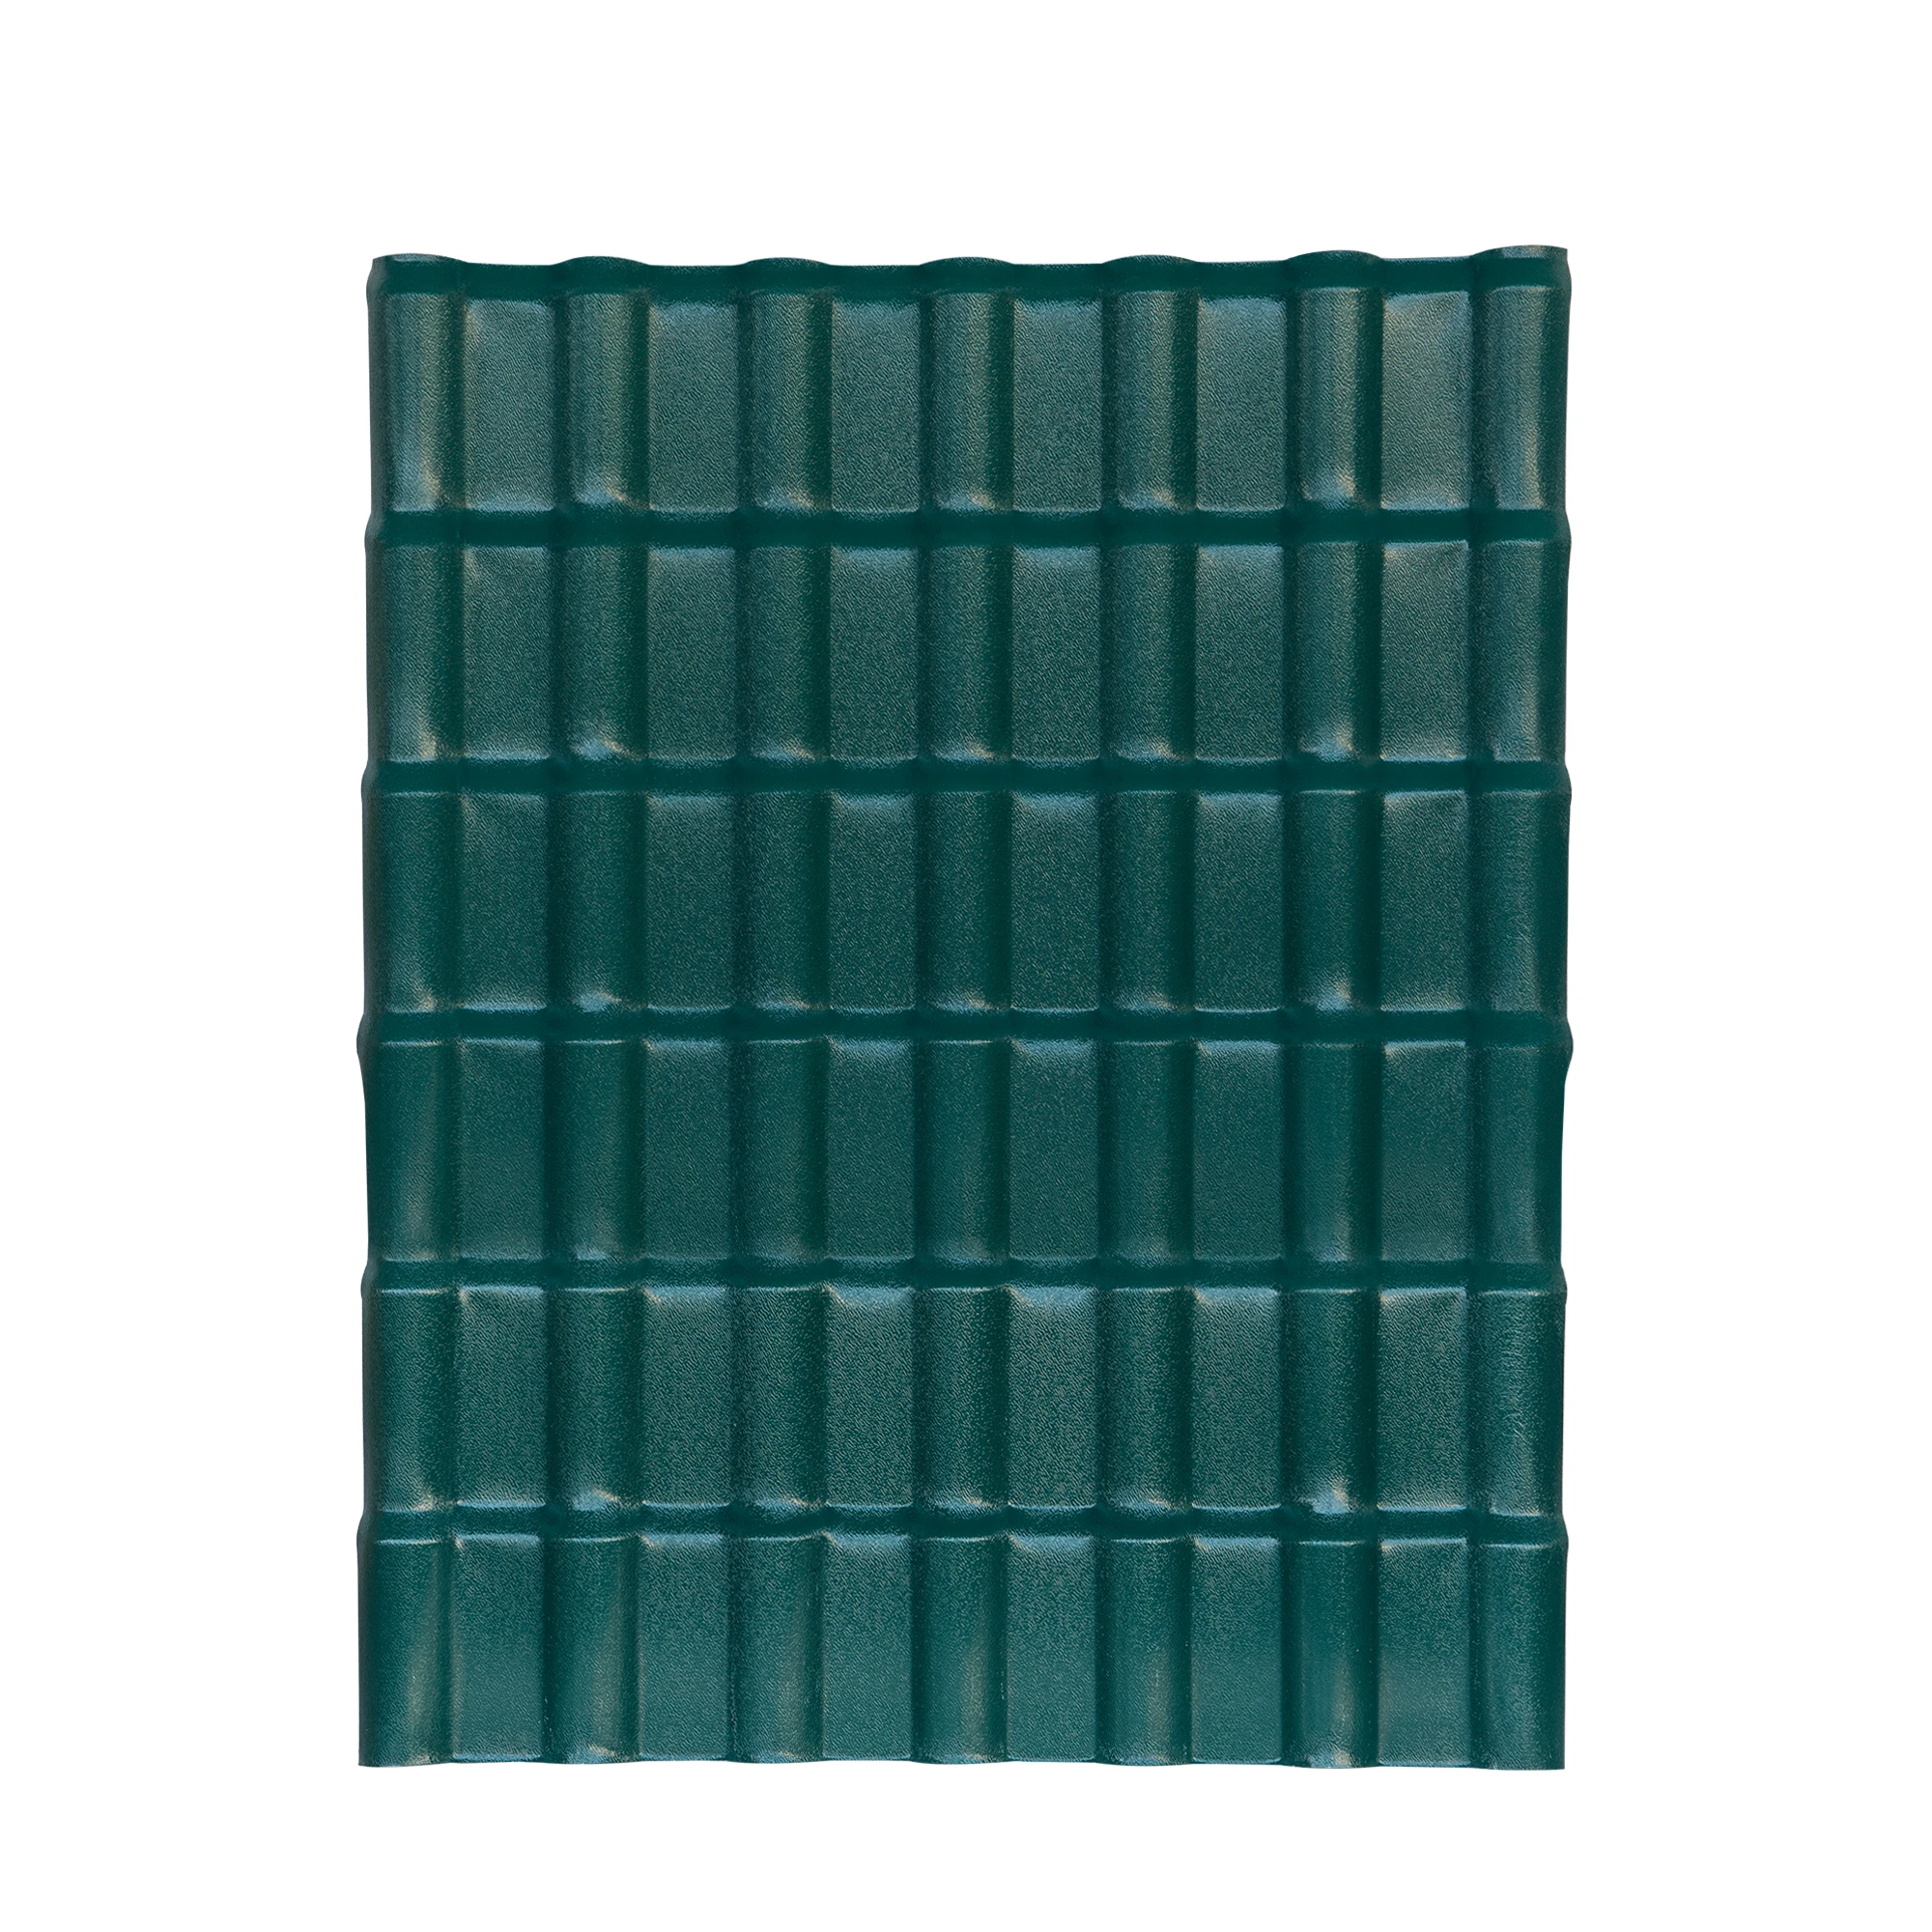 Spanish style corrugated plastic roofing tile synthetic thatch roof tile